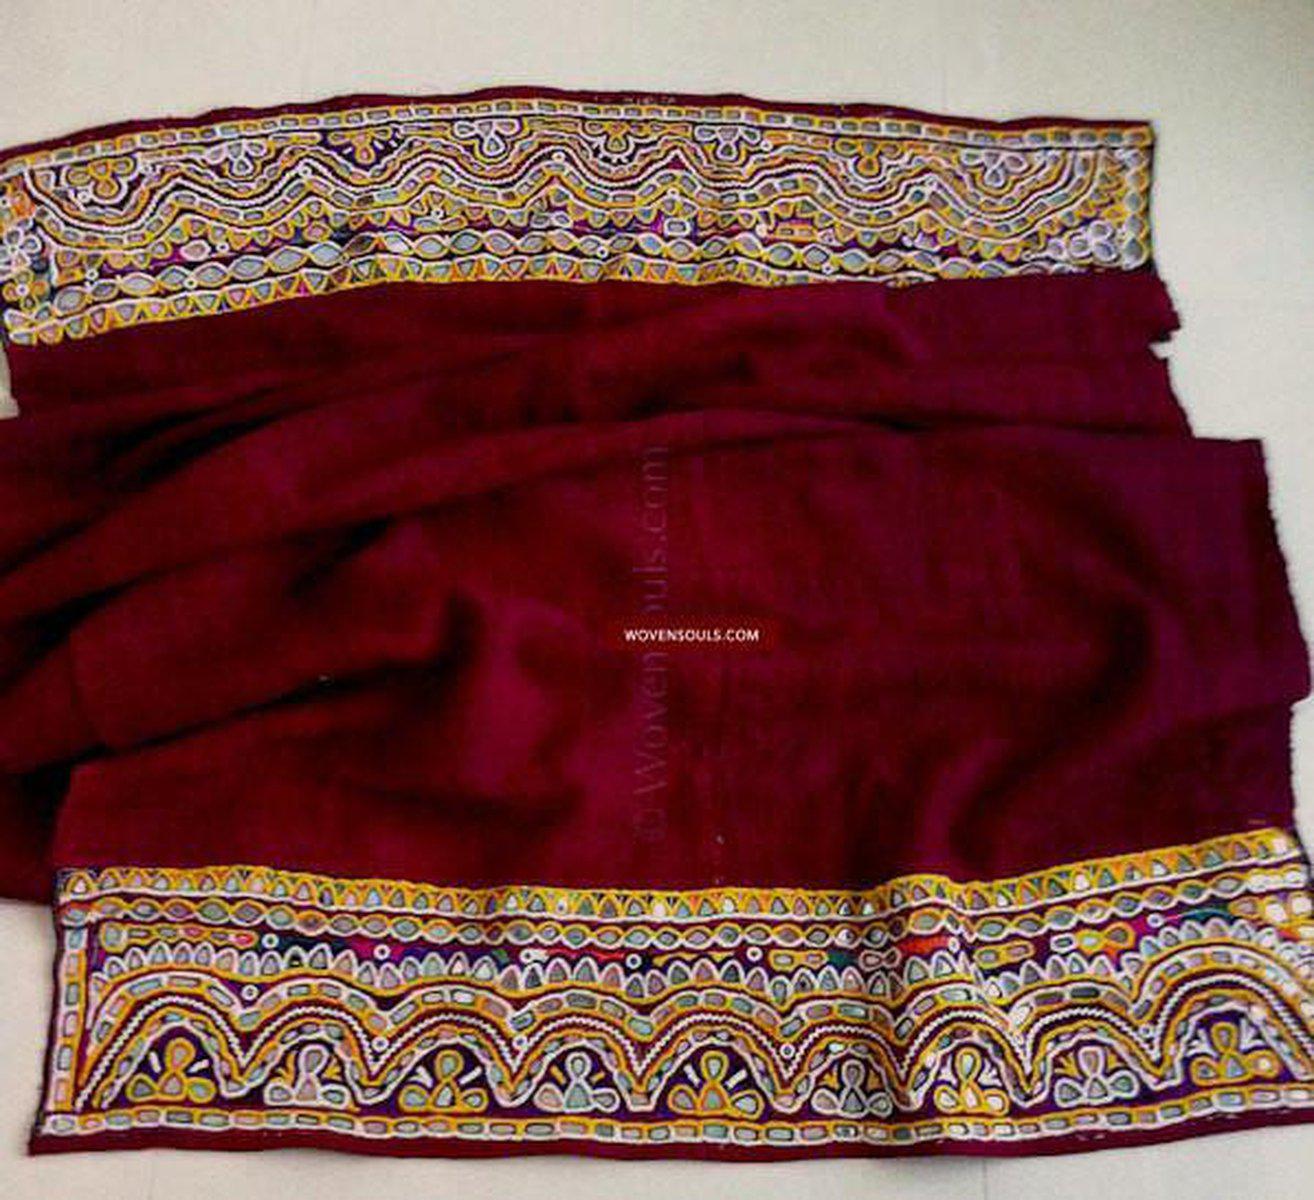 SOLD Old Gujarat Mirror Embroidery Wool Shawl-WOVENSOULS-Antique-Vintage-Textiles-Art-Decor